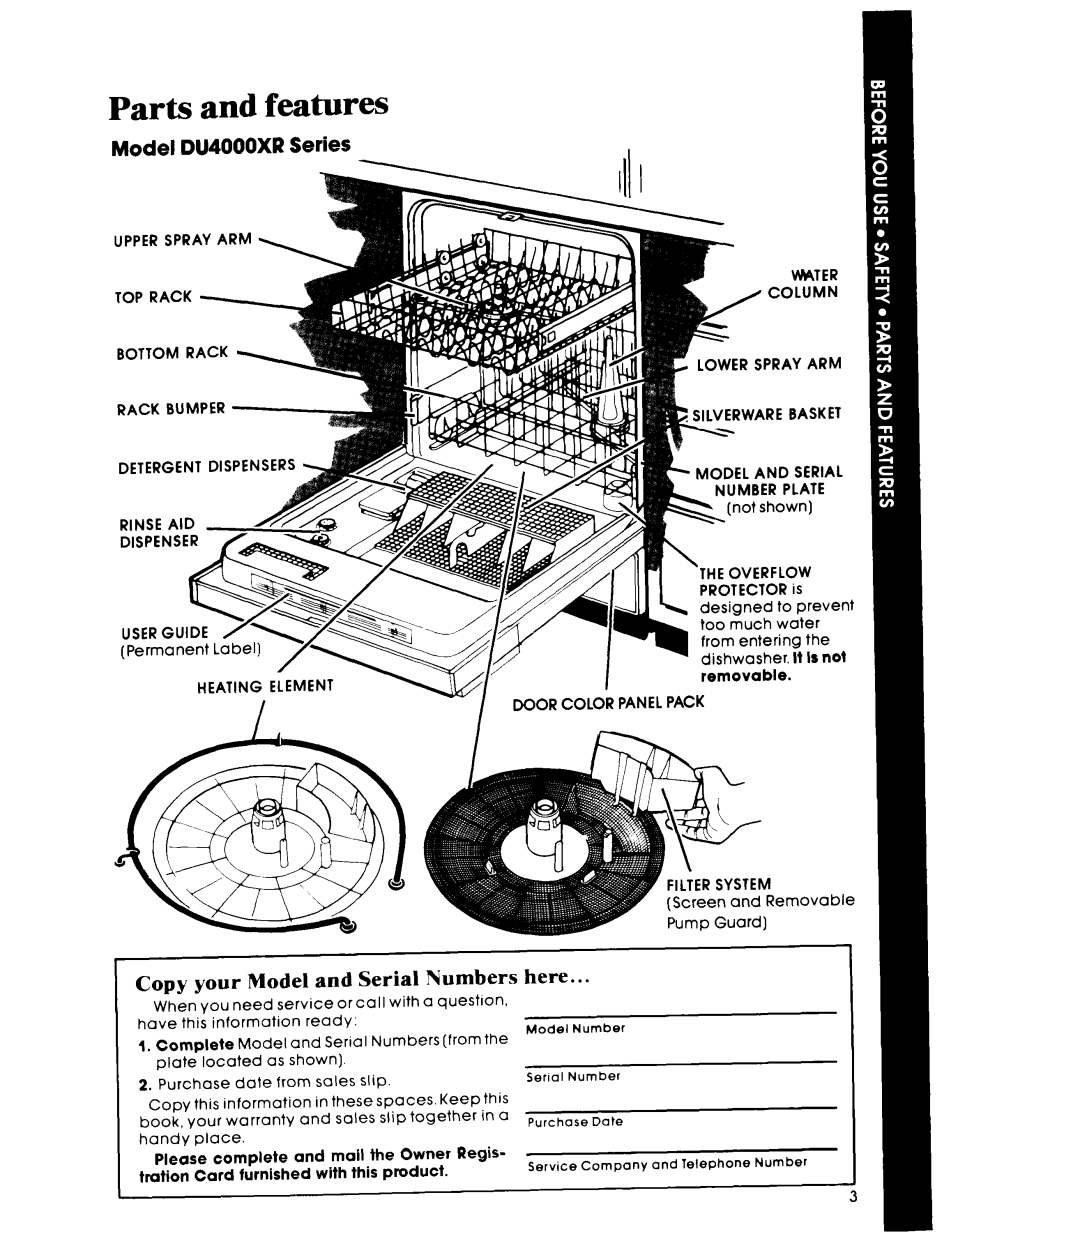 Whirlpool manual Parts and features, Model DU4000XR Series, Copy-- your- Model and Serial Numbers, here 